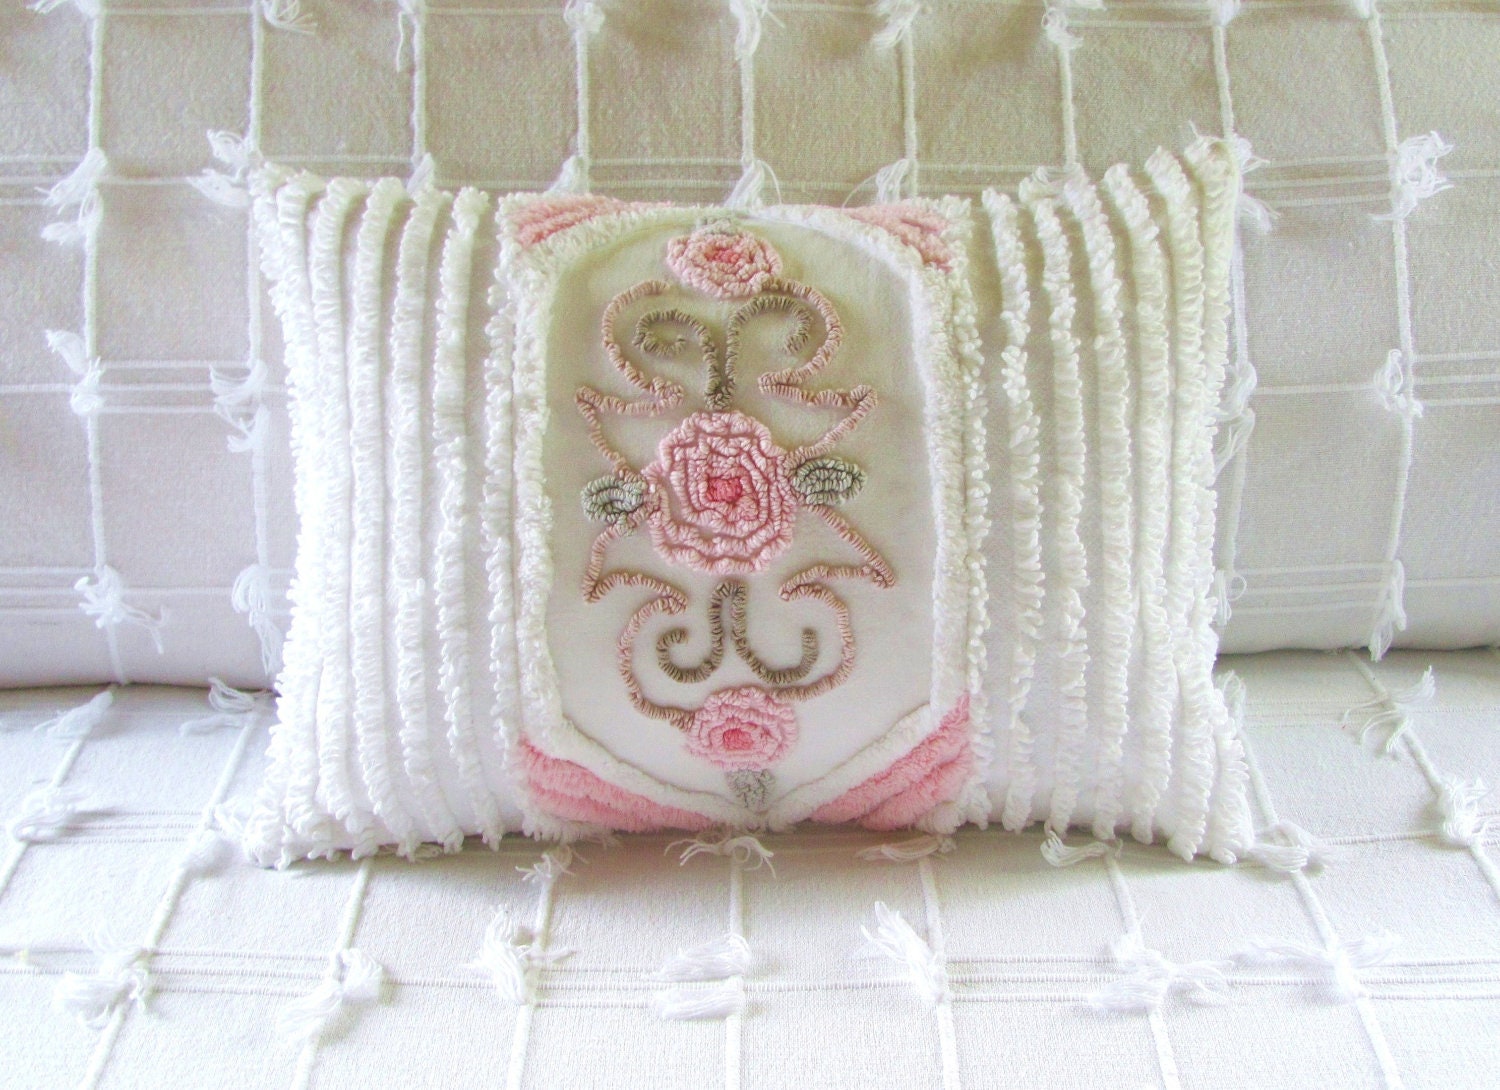 THREE ROSES handmade chenille pillow cover 12 X 16 pink roses vintage chenille cushion cottage chic